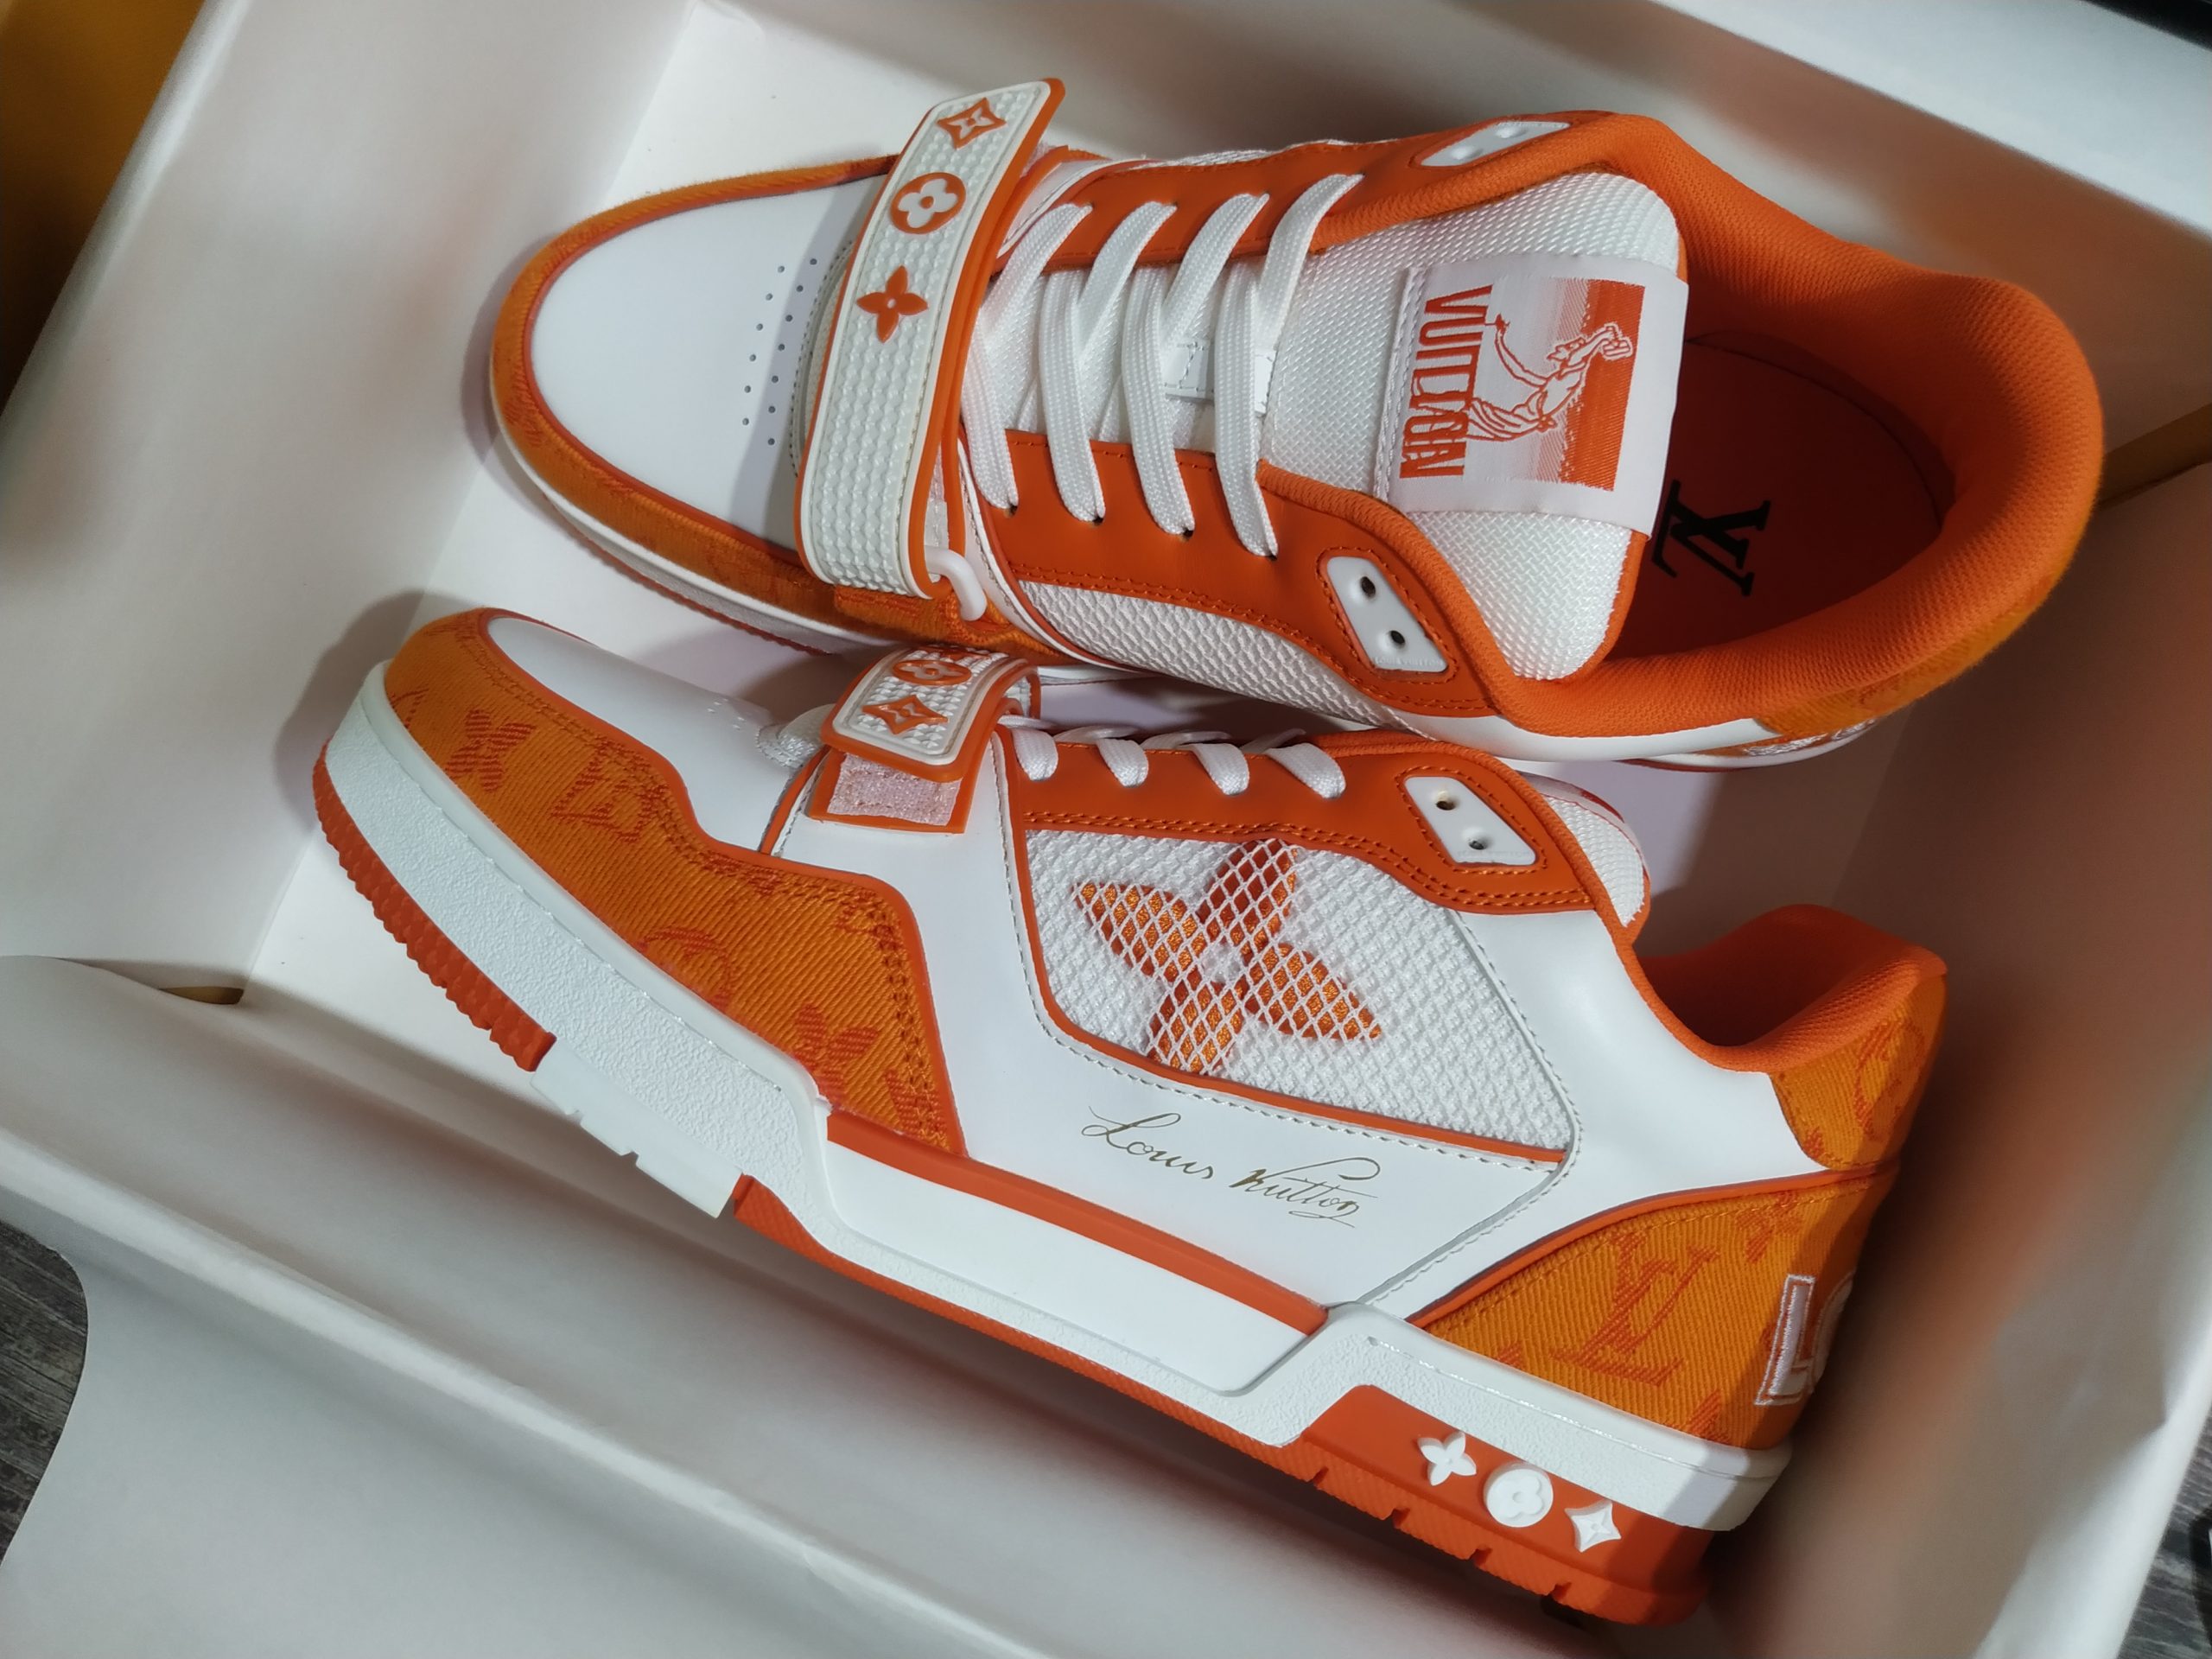 LOUIS VUITTON TRAINER SNEAKER ORANGE - LSVT325 - REPGOD.ORG/IS - Trusted  Replica Products - ReplicaGods - REPGODS.ORG